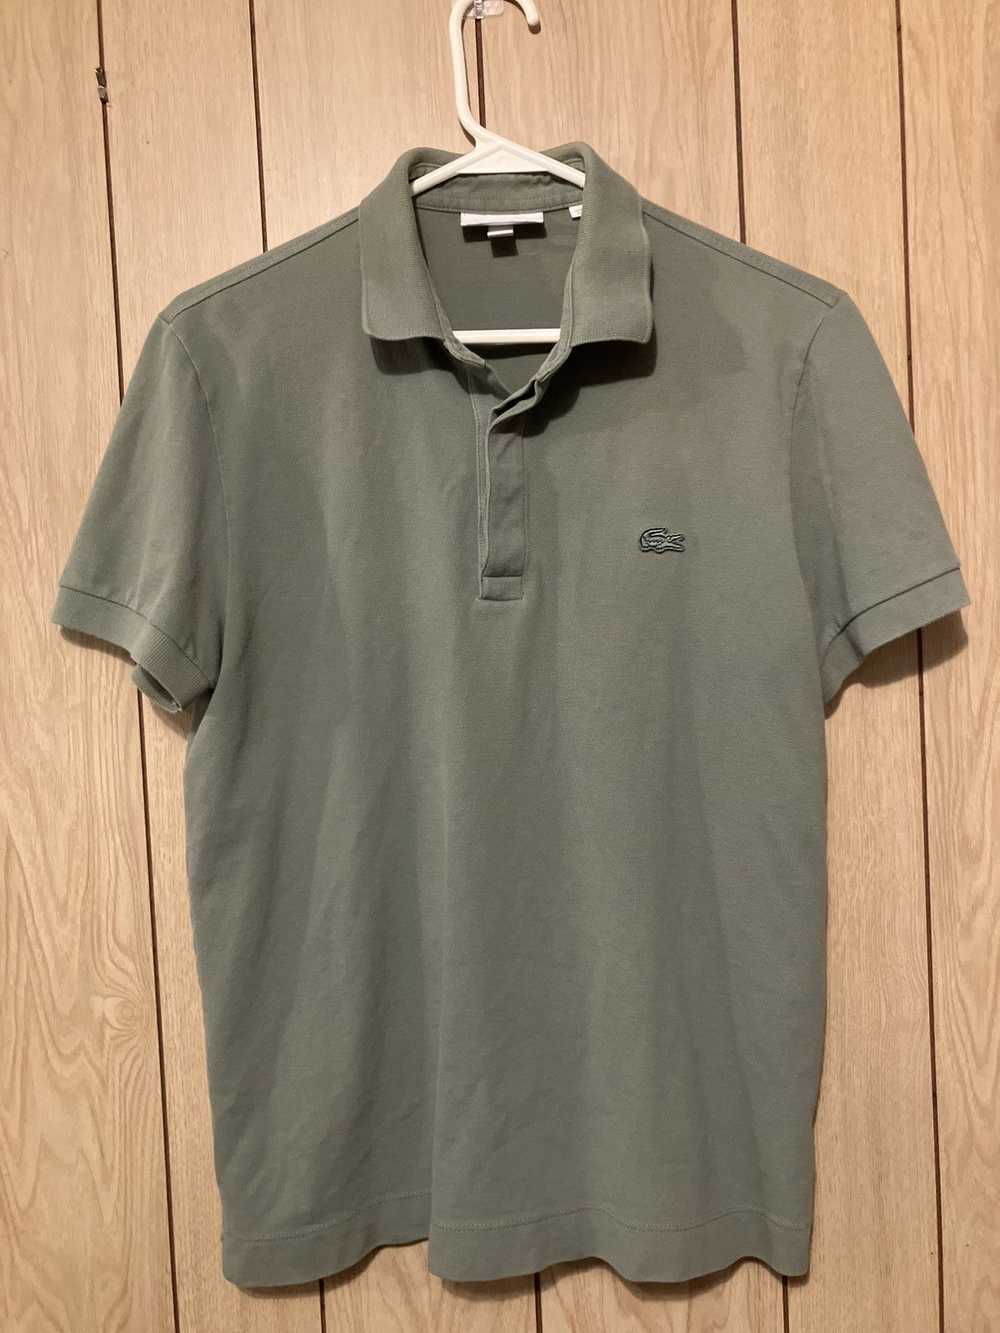 Lacoste Lacoste Polo Shirt. Small - image 10